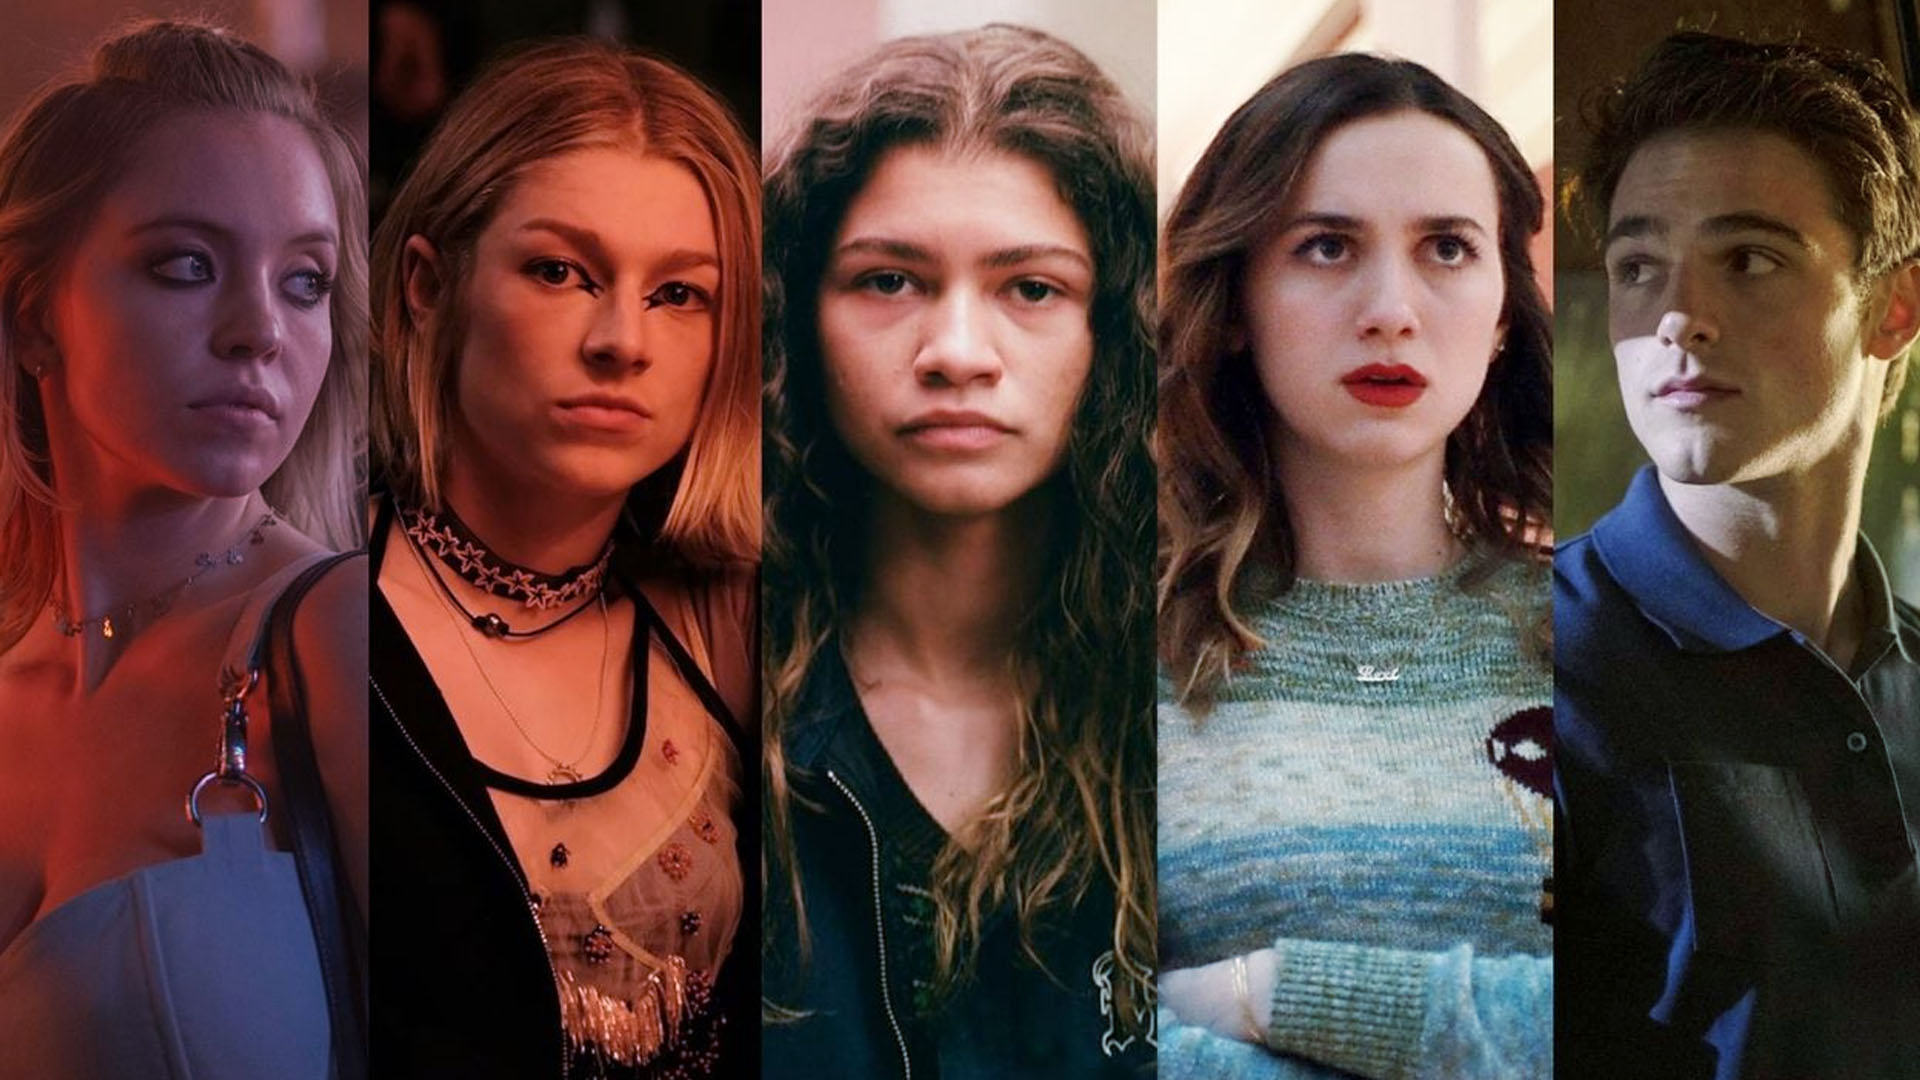 Euphoria Season 3 Release Date, Plot, Cast, Making, And Other Details!